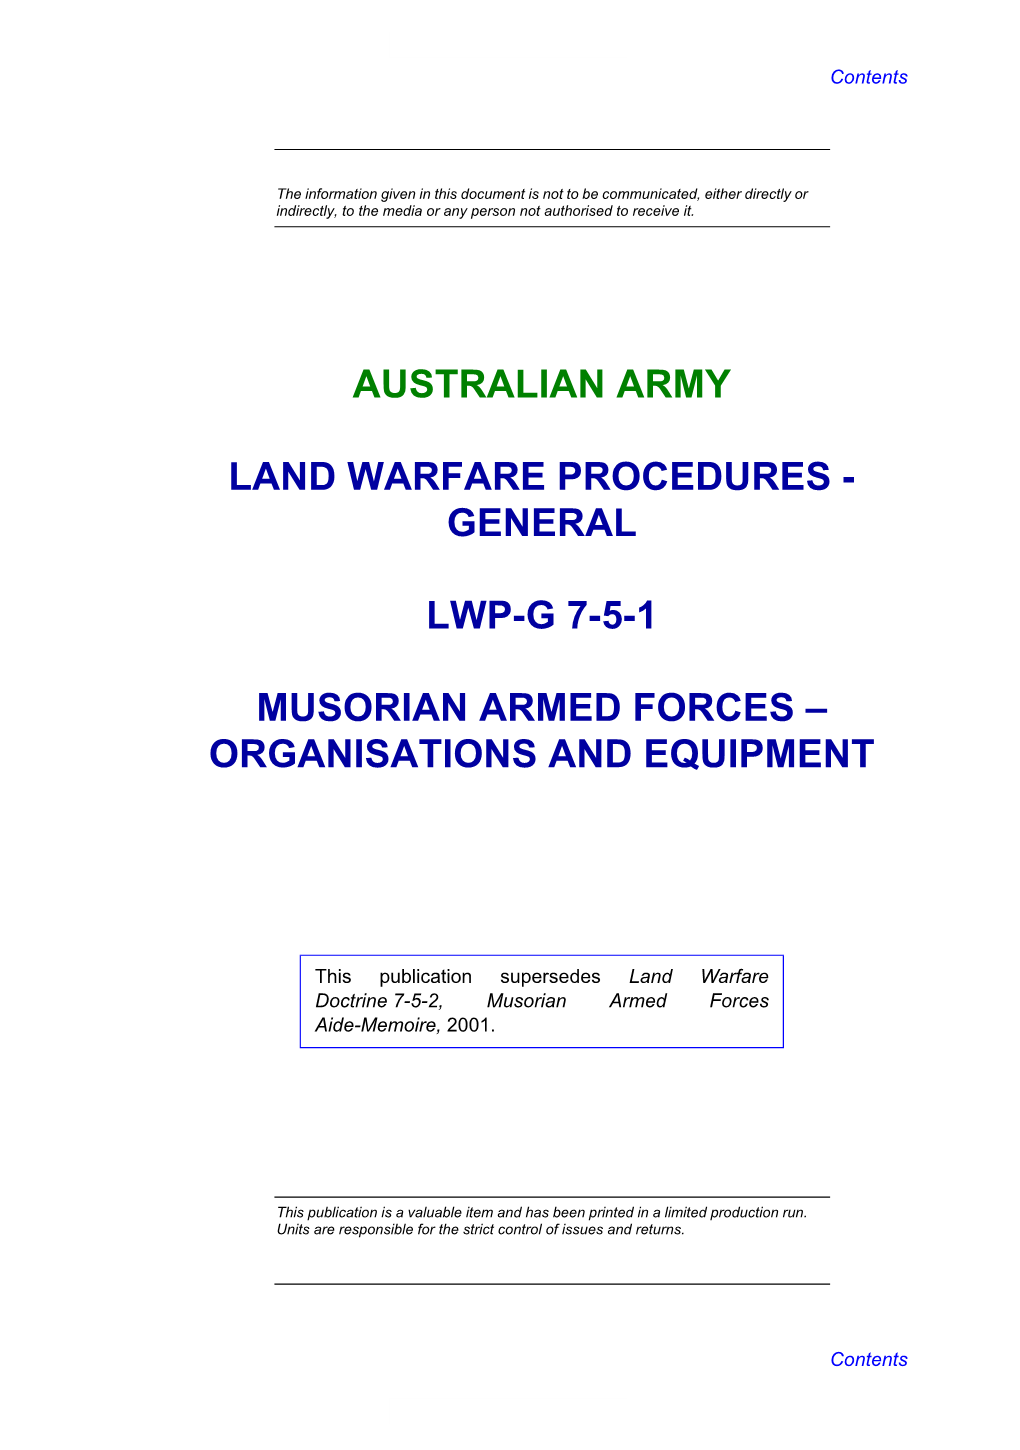 LWP-G 7-5-1, Musorian Armed Forces – Organisations and Equipment, 2005 AL1